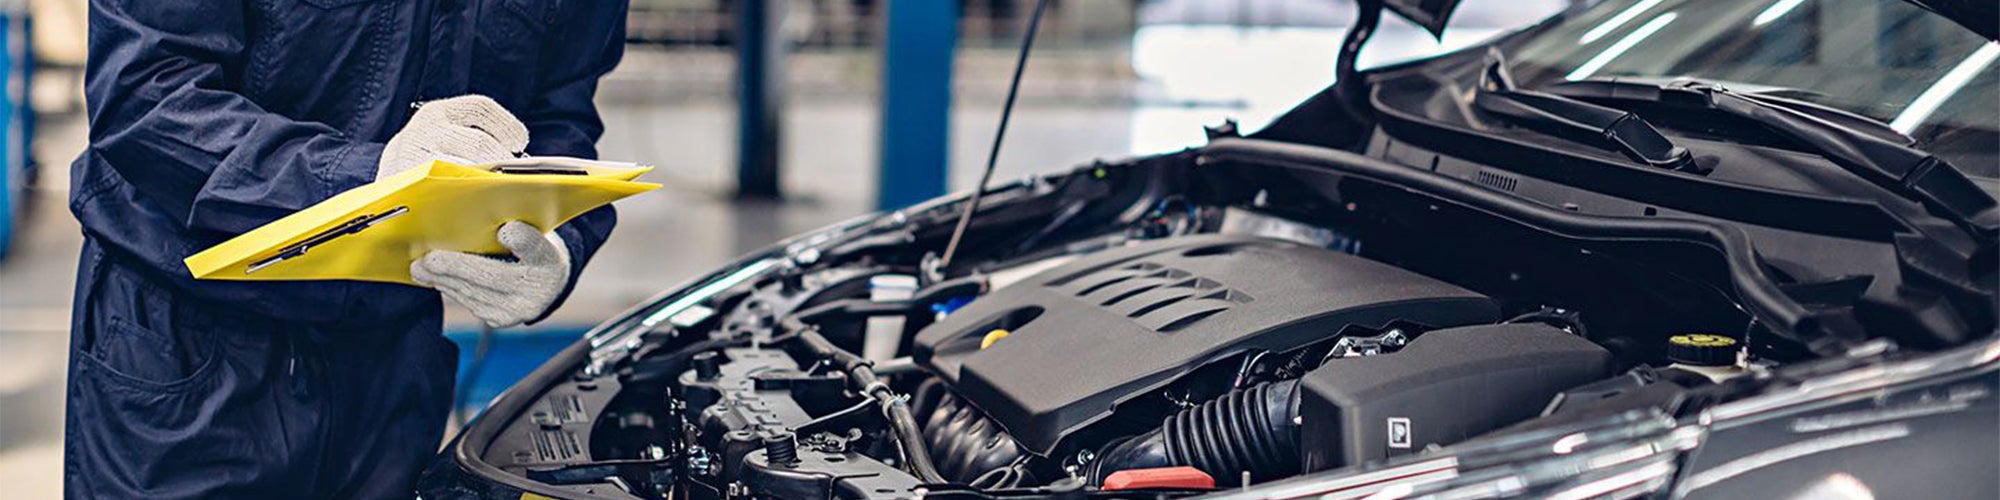 Car Repair and Maintenance in Chester County, PA